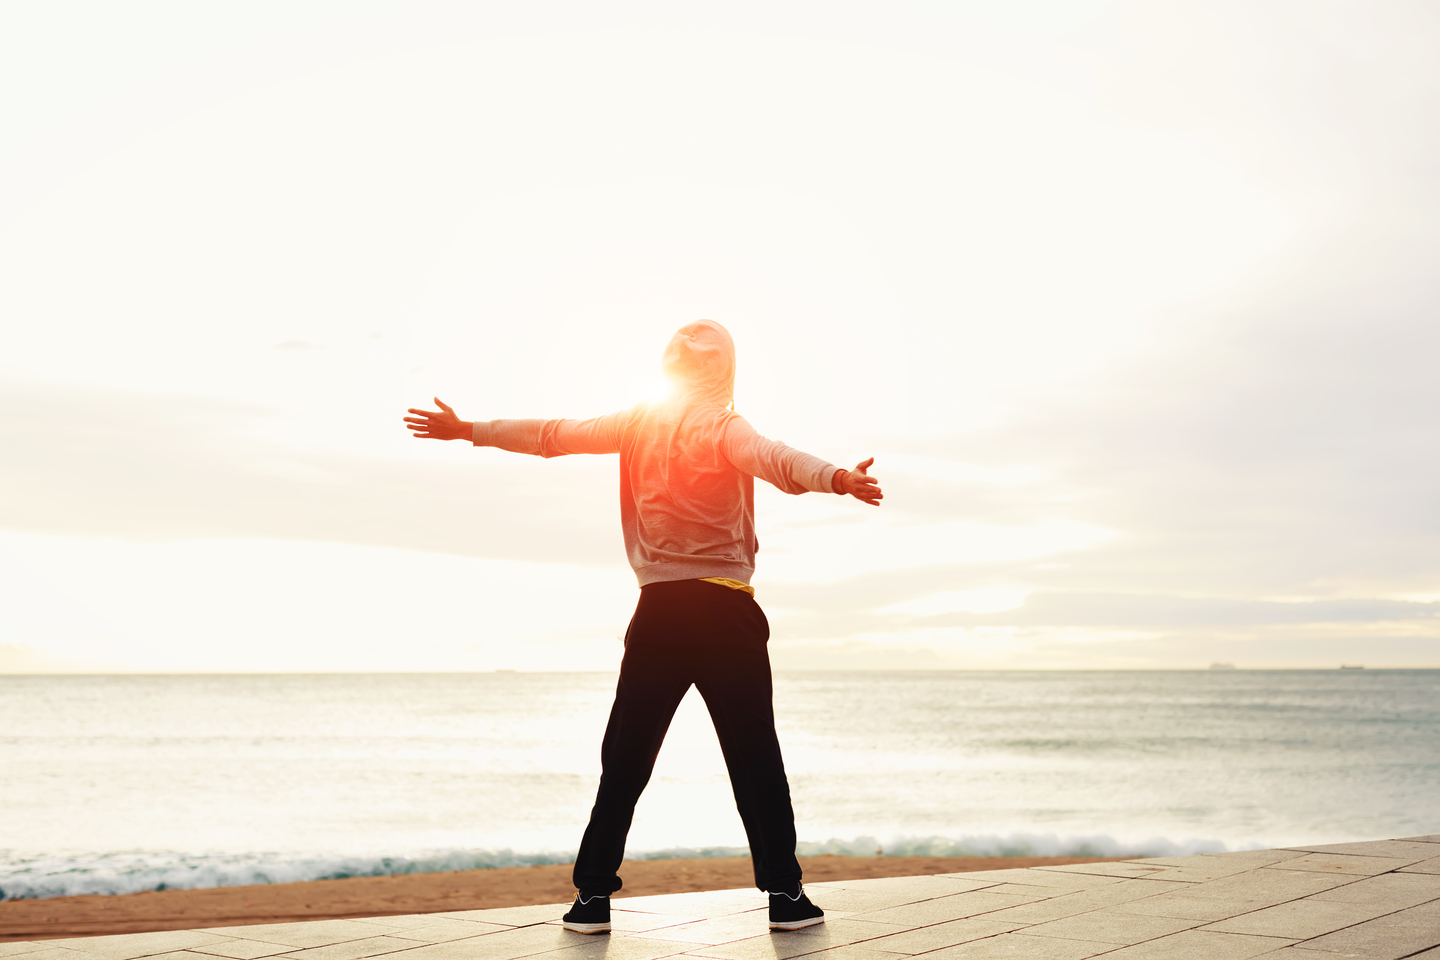 Freedom, relax and harmony in nature, Rear view of a young guy with his arms outstretched at the seaside standing next to the sea, happiness emotional concept